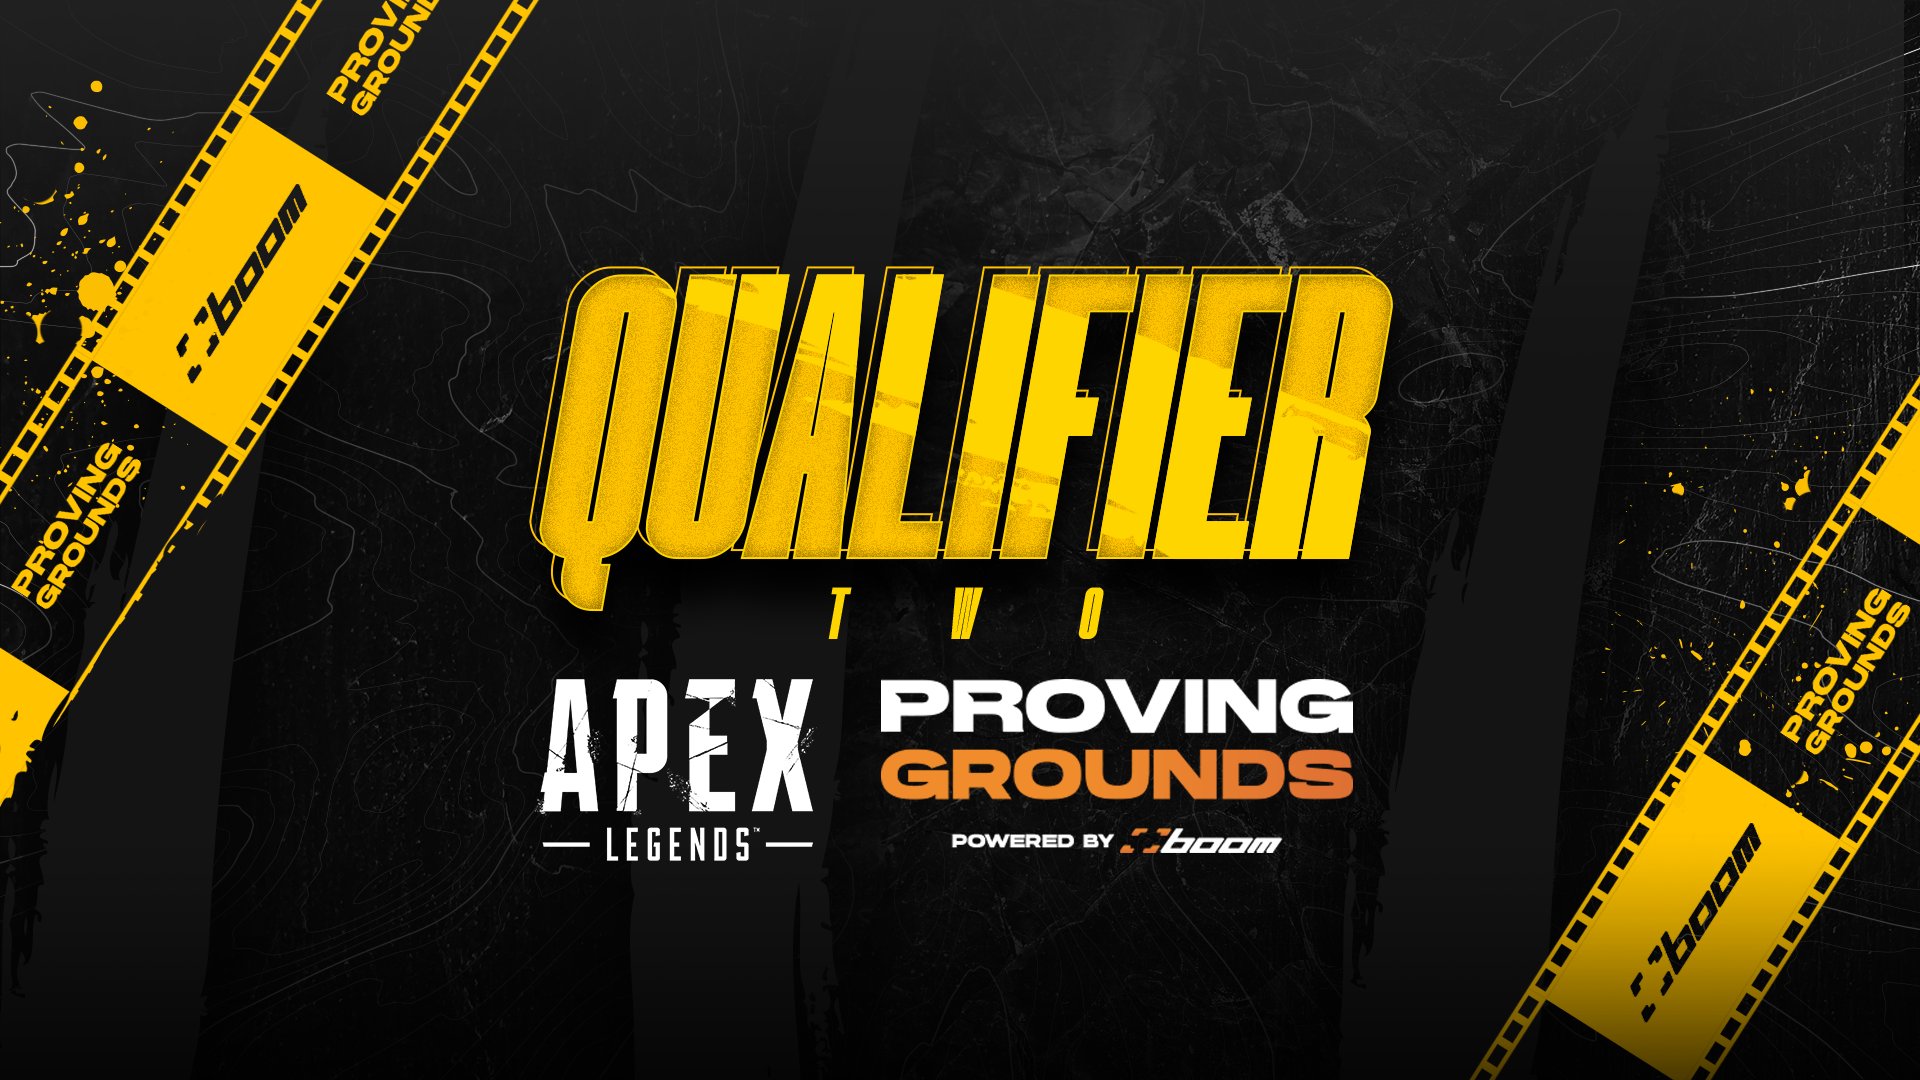 TUESDAY – Get Your A into Apex Legends Proving Grounds!